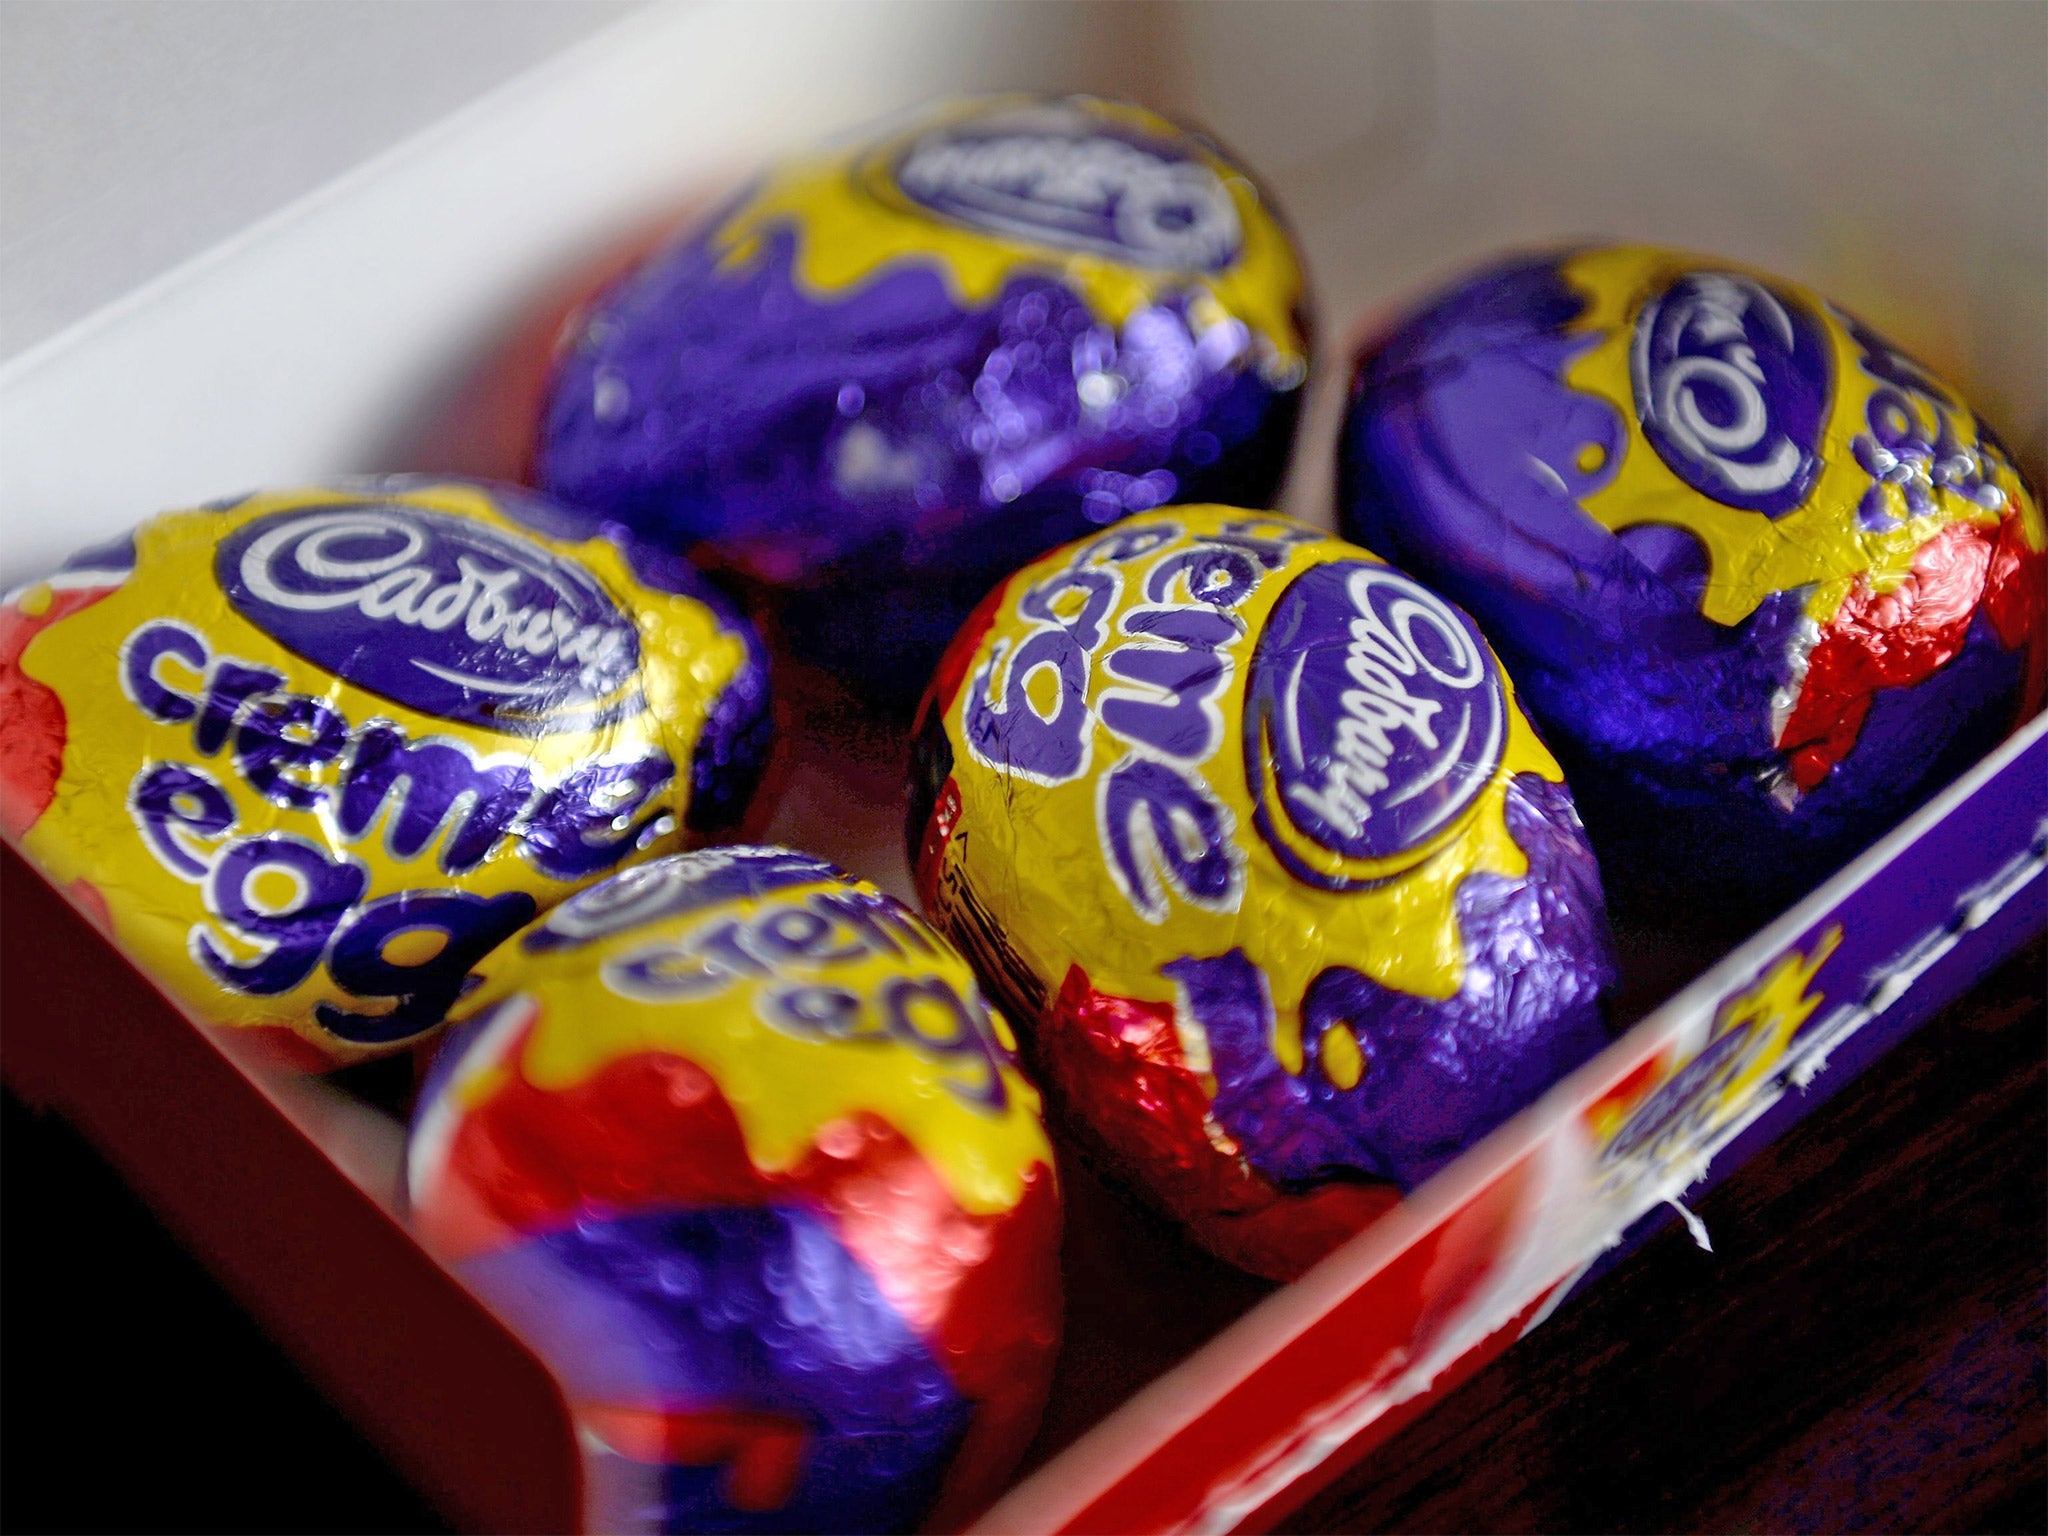 Since the EU referendum, a pack of Cadbury Creme Eggs has shrunk from six eggs to five